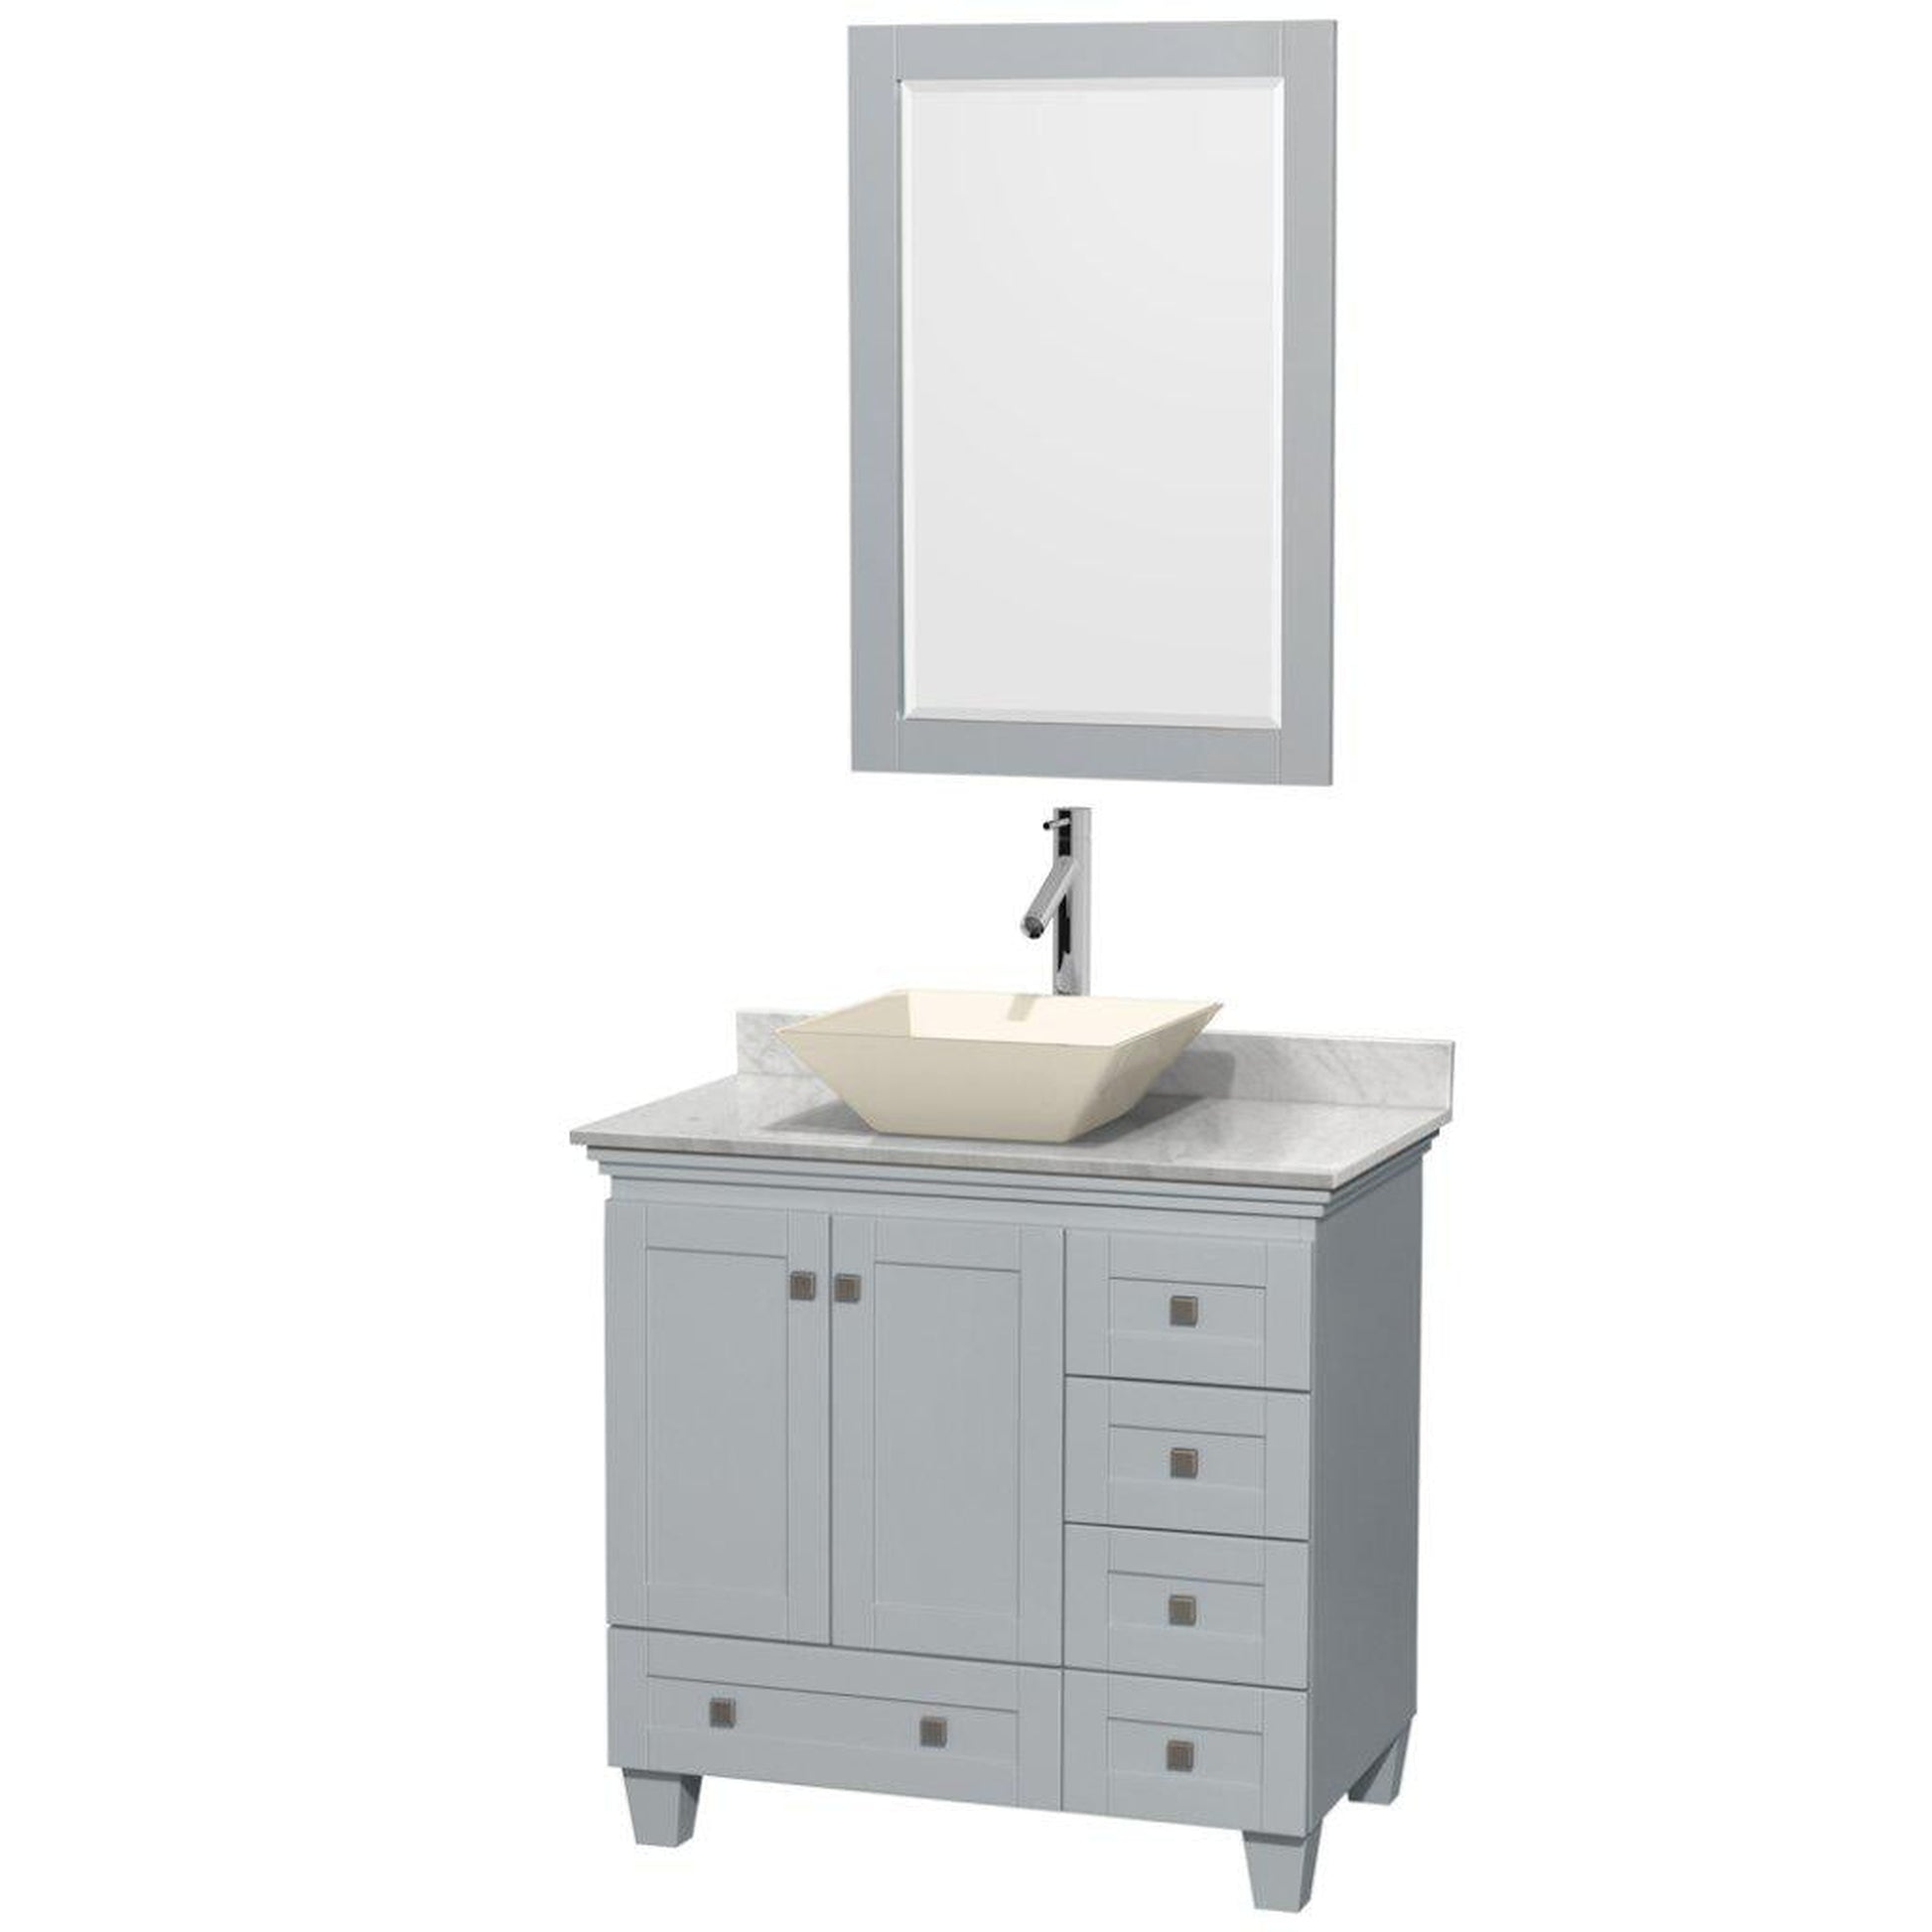 Wyndham Collection Acclaim 36" Single Bathroom Oyster Gray Vanity Set With White Carrara Marble Countertop, Pyra Bone Porcelain Sink, and 24" Mirror